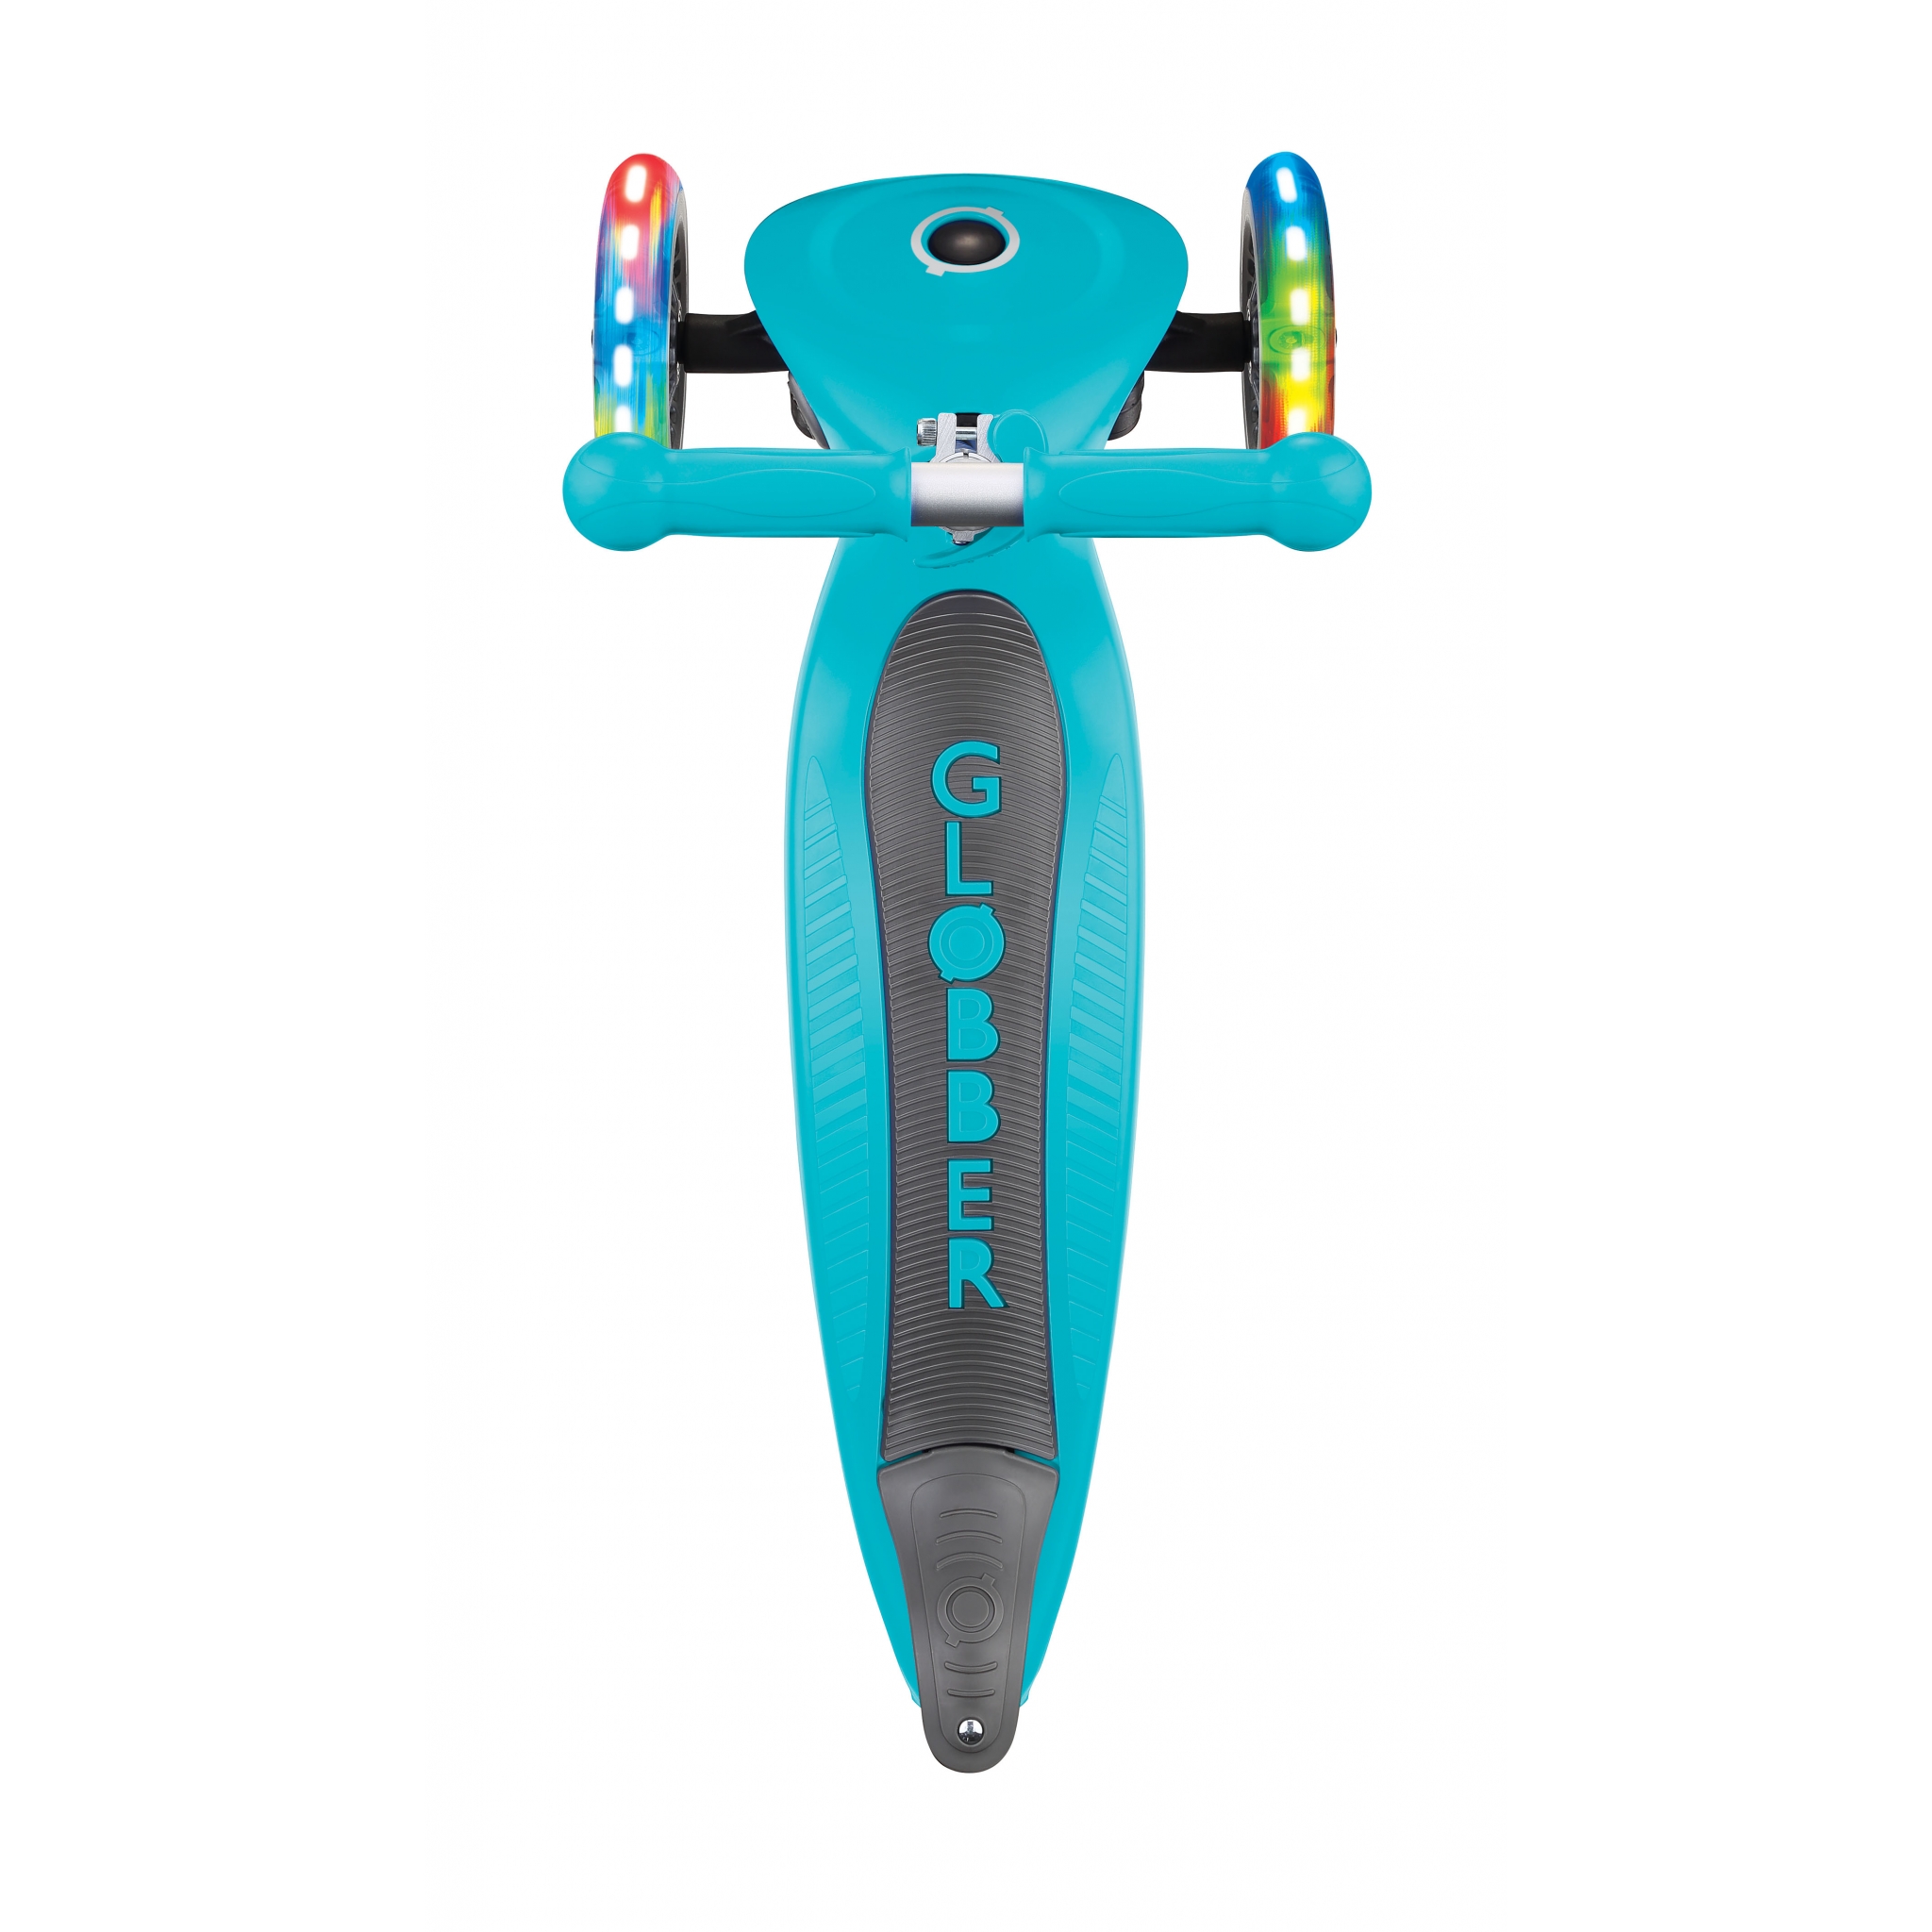 PRIMO-FOLDABLE-LIGHTS-3-wheel-light-up-scooter-for-kids-with-big-deck-teal 3